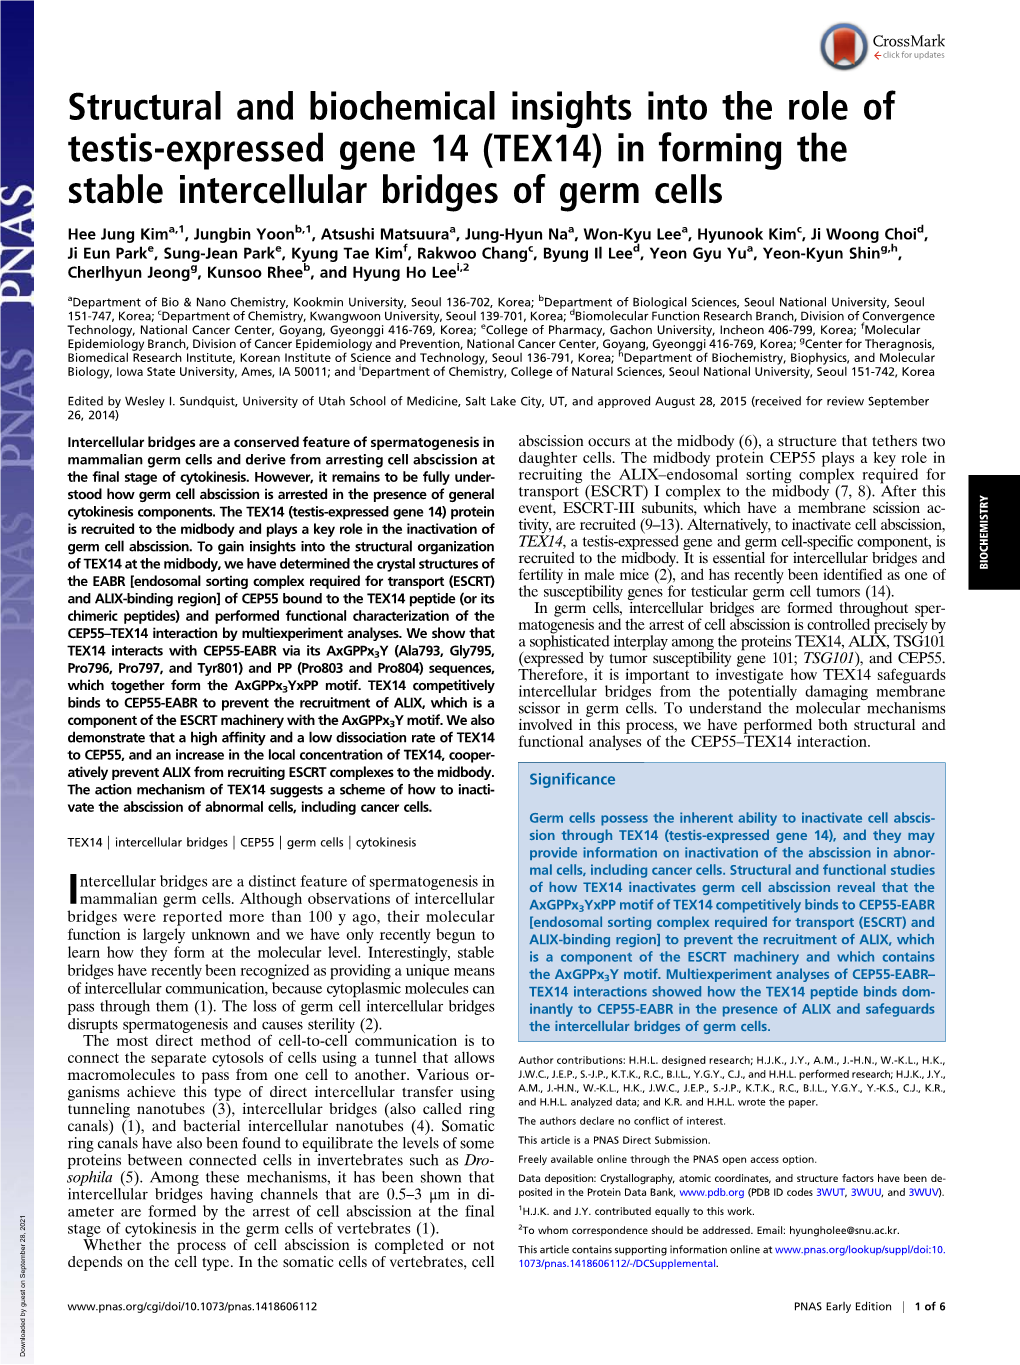 TEX14) in Forming the Stable Intercellular Bridges of Germ Cells